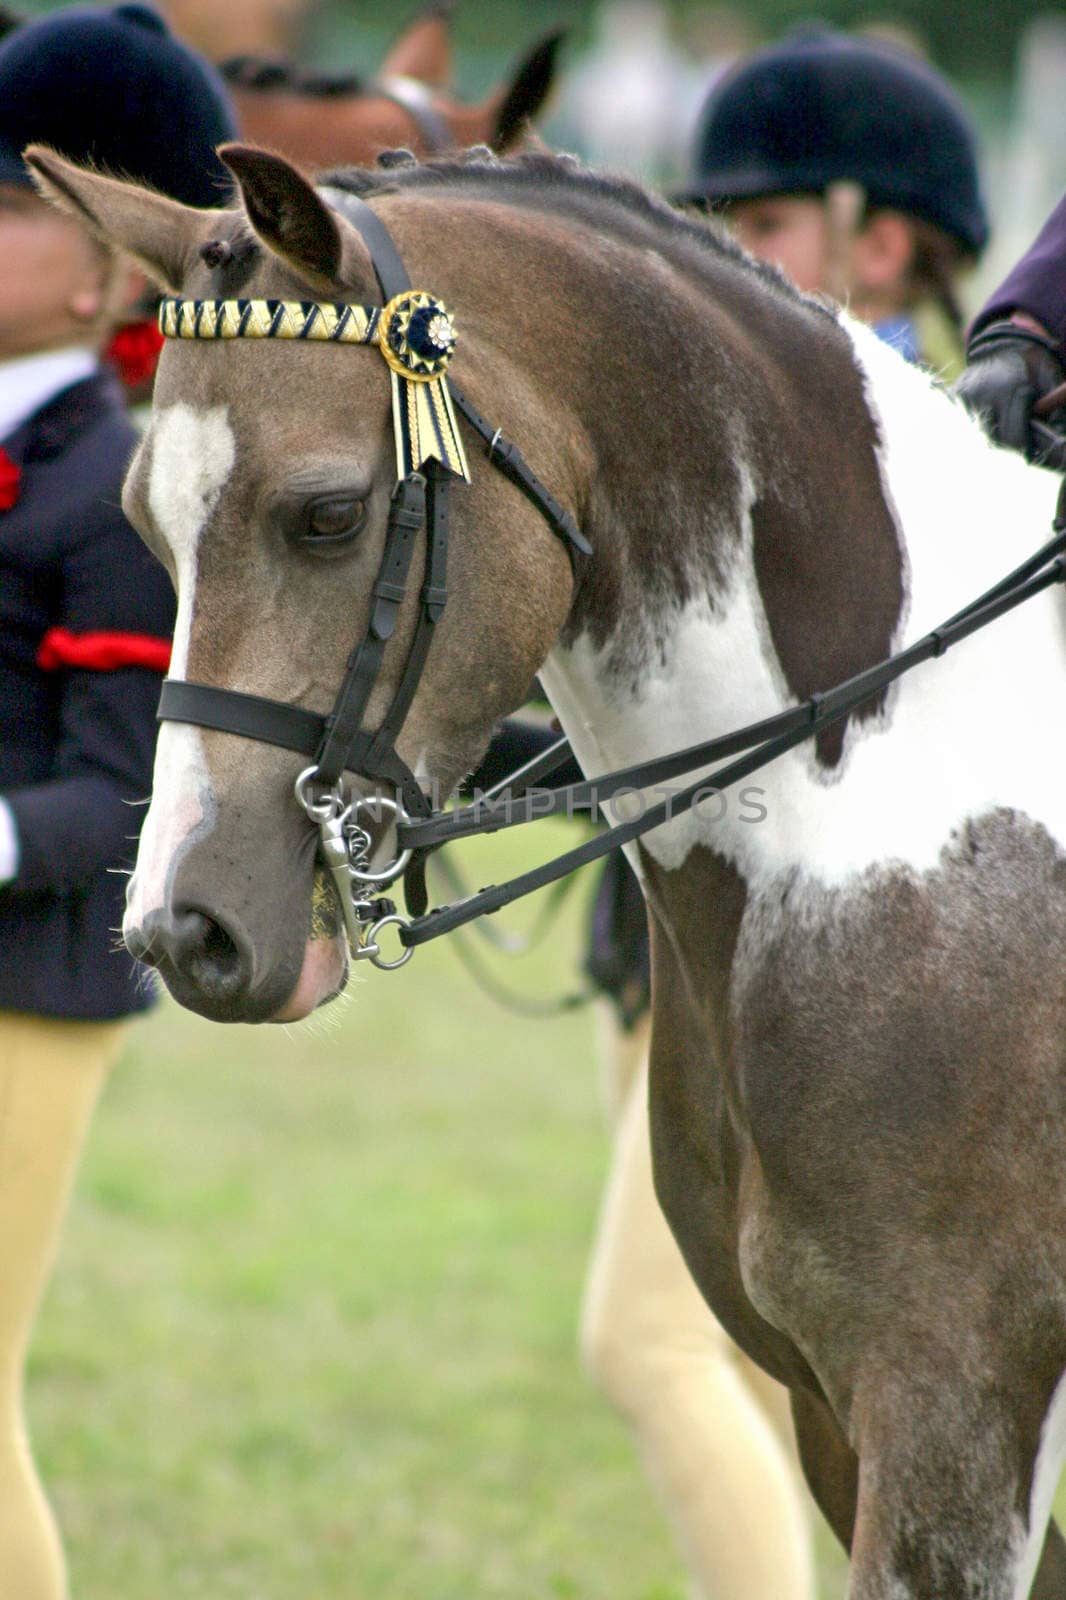 The front and head of a dressage horse